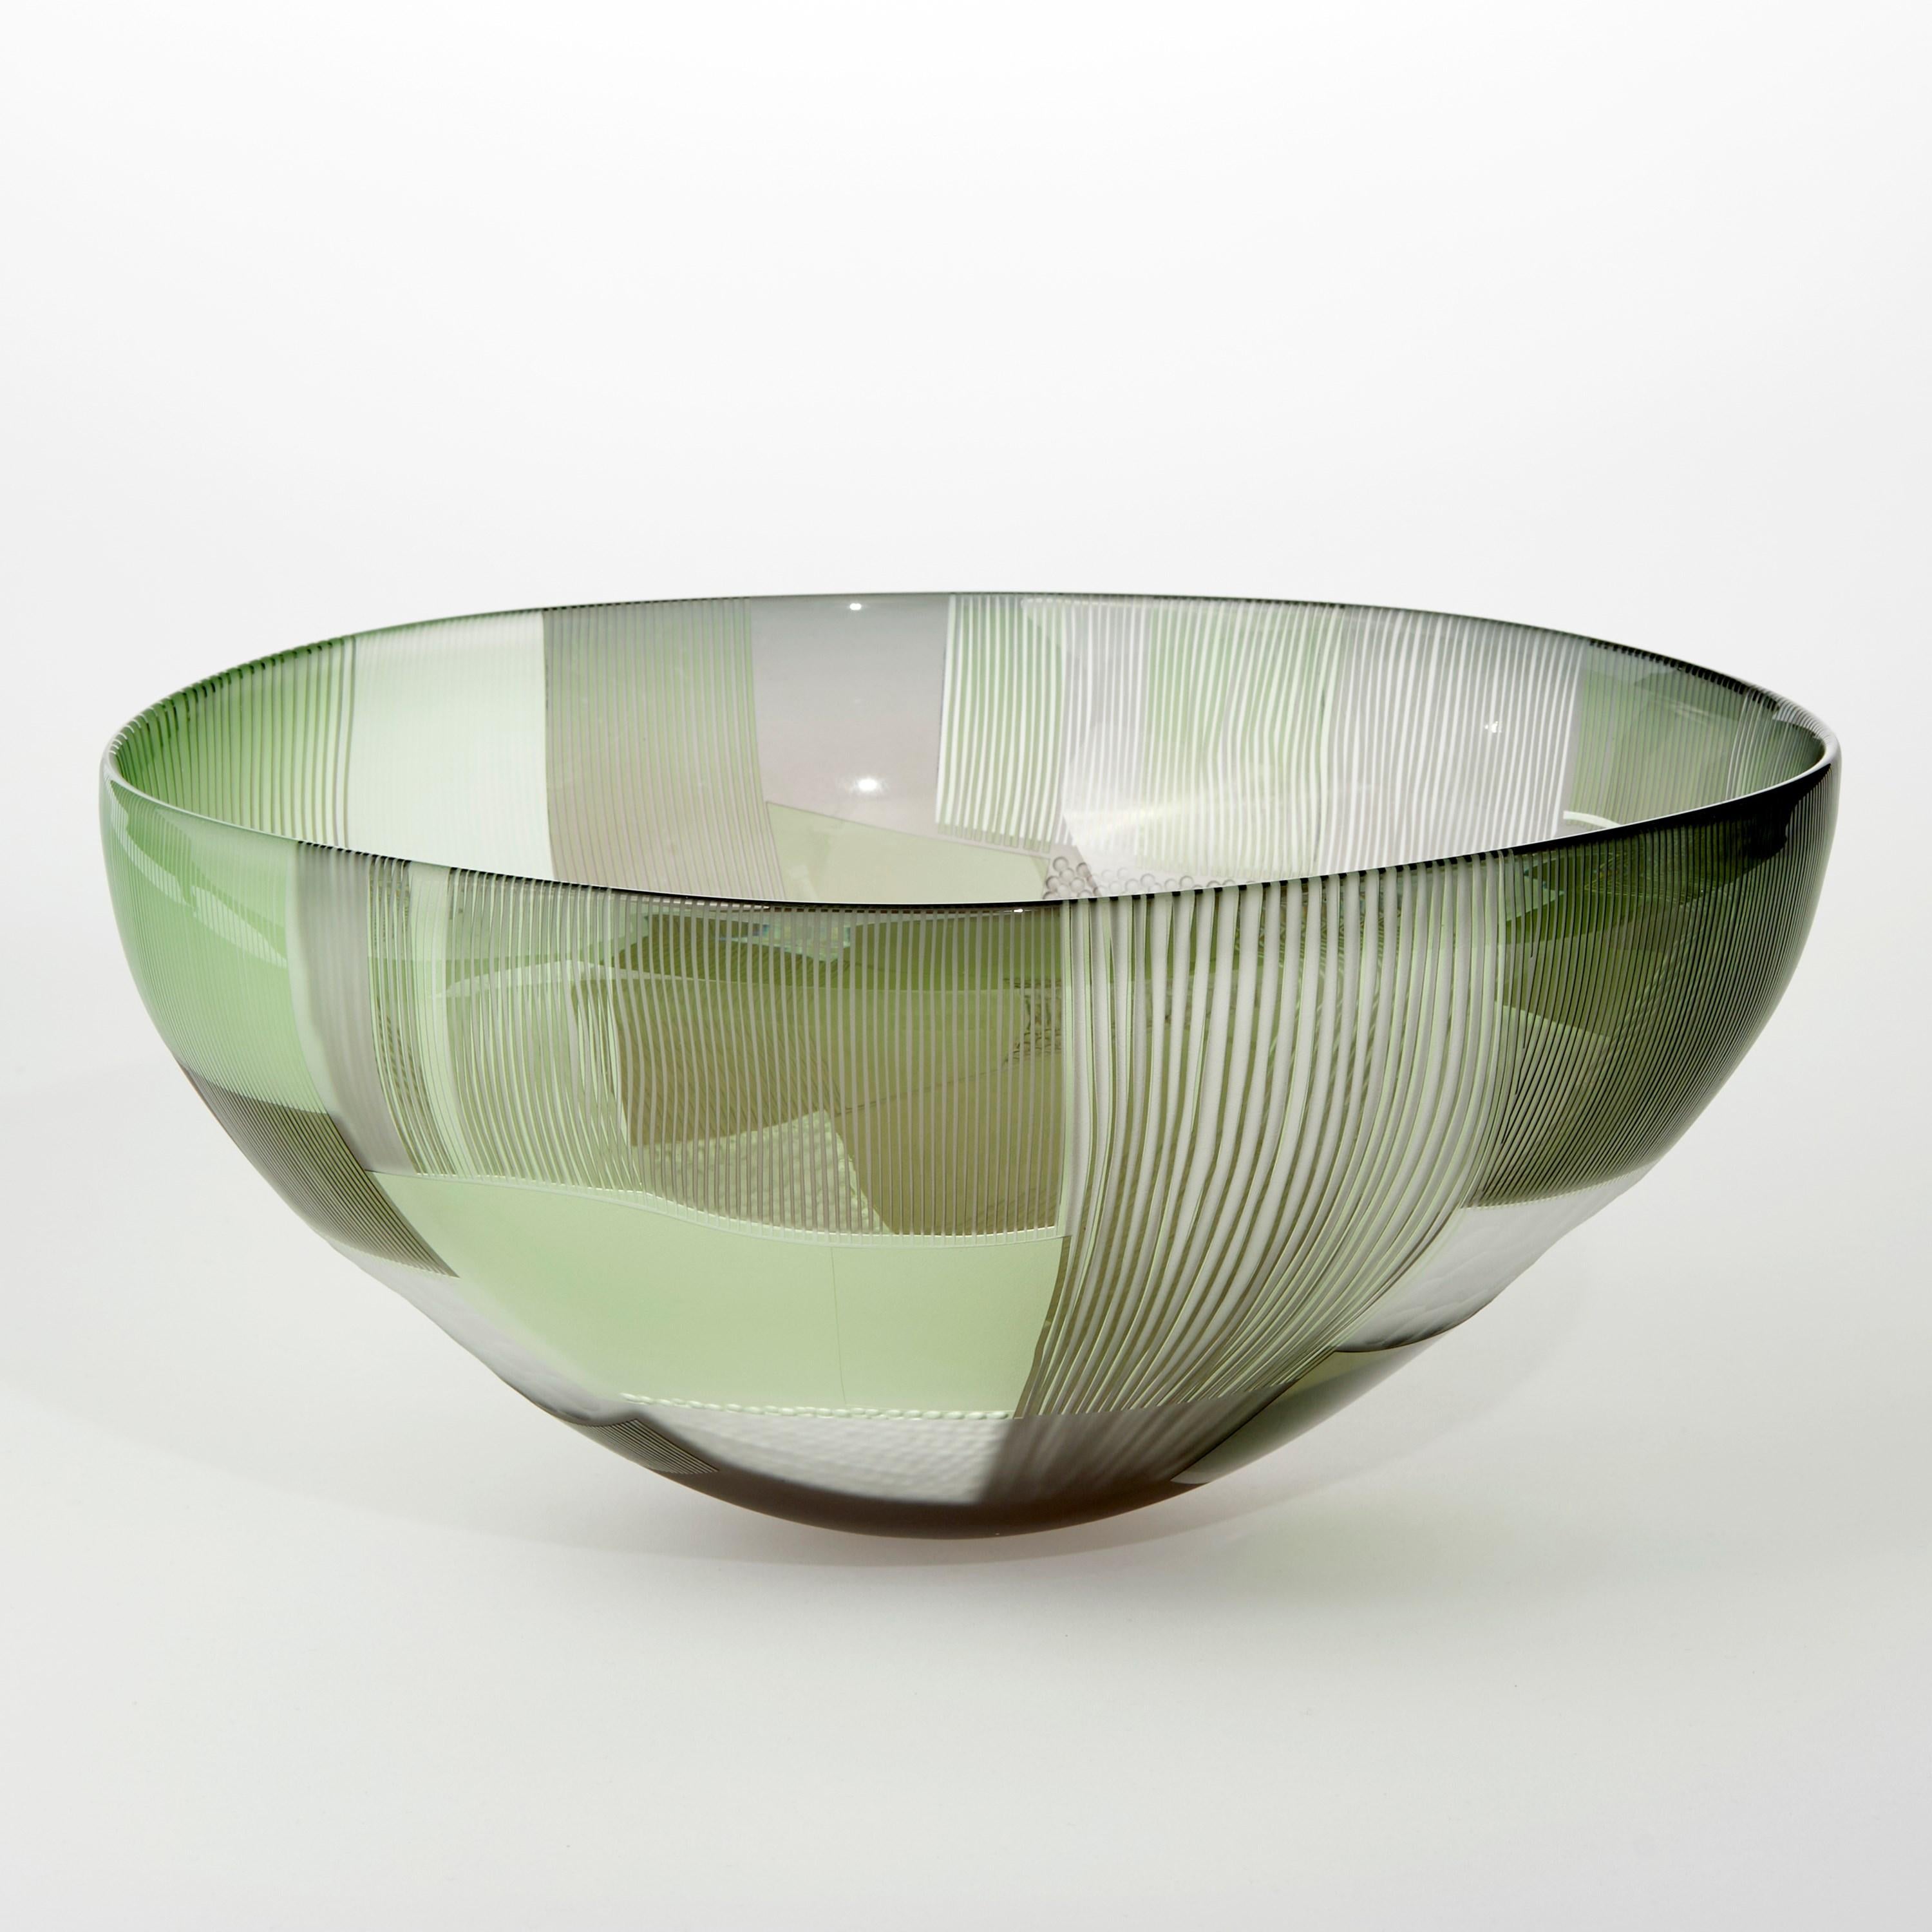 'Abstracted Land Grey Sky over Moss Green' is a unique handblown and cut glass artwork by the British artist, Kate Jones of Gillies Jones.

In the artist's own words:

“This new body of work references both the evident structure of the landscape and